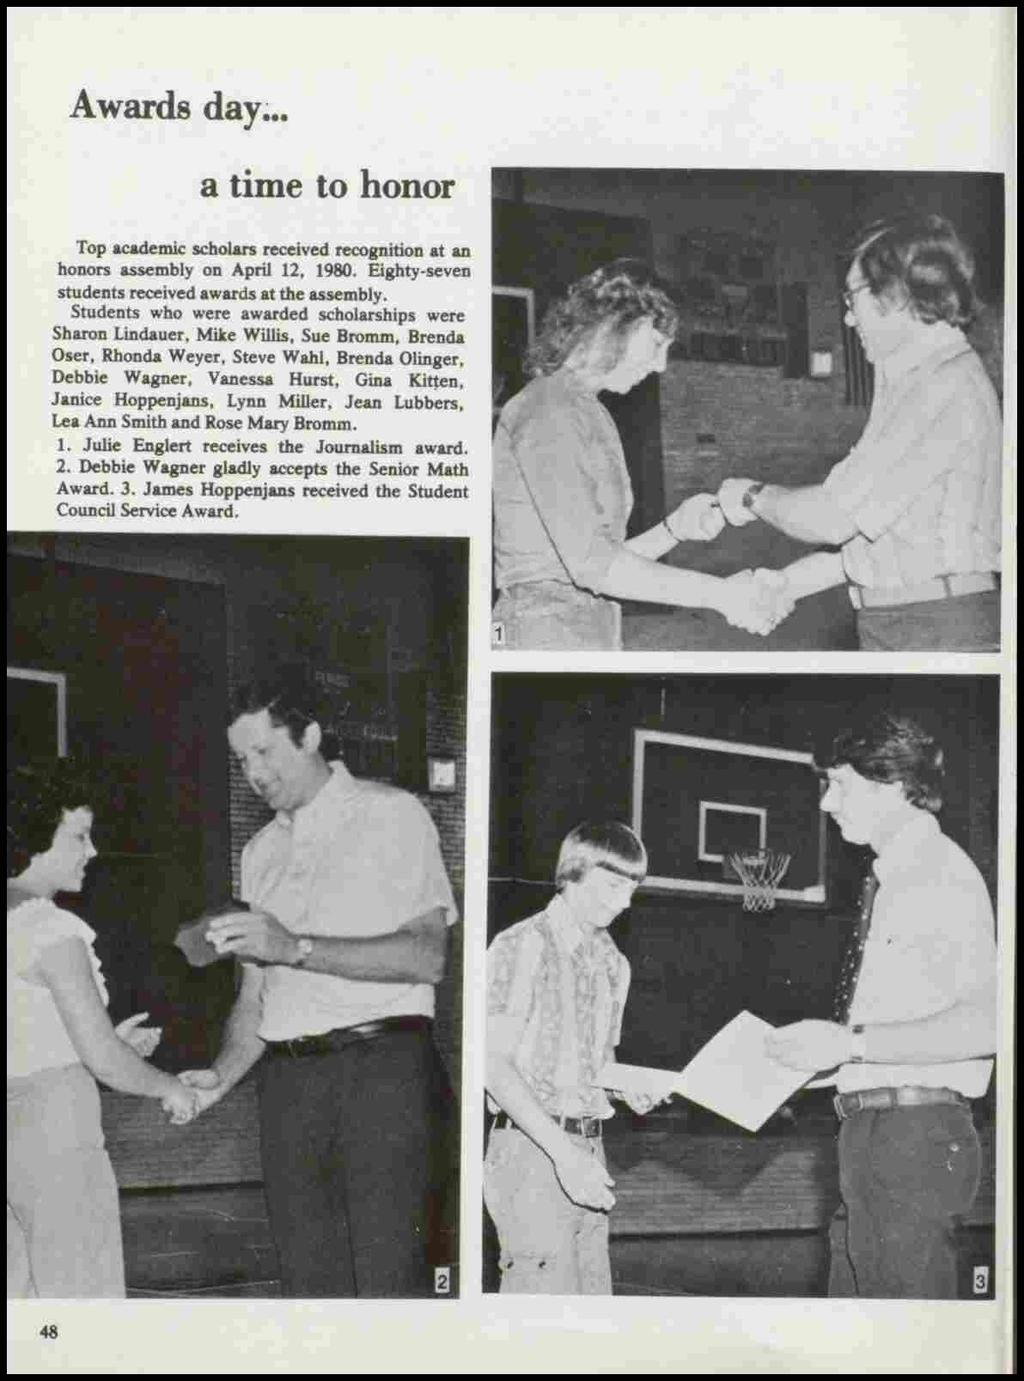 Awards day~.. a time to honor Top academic scholars received recognition at an honors assembly on April 12, 1980. Eighty-seven students received awards at the assembly.